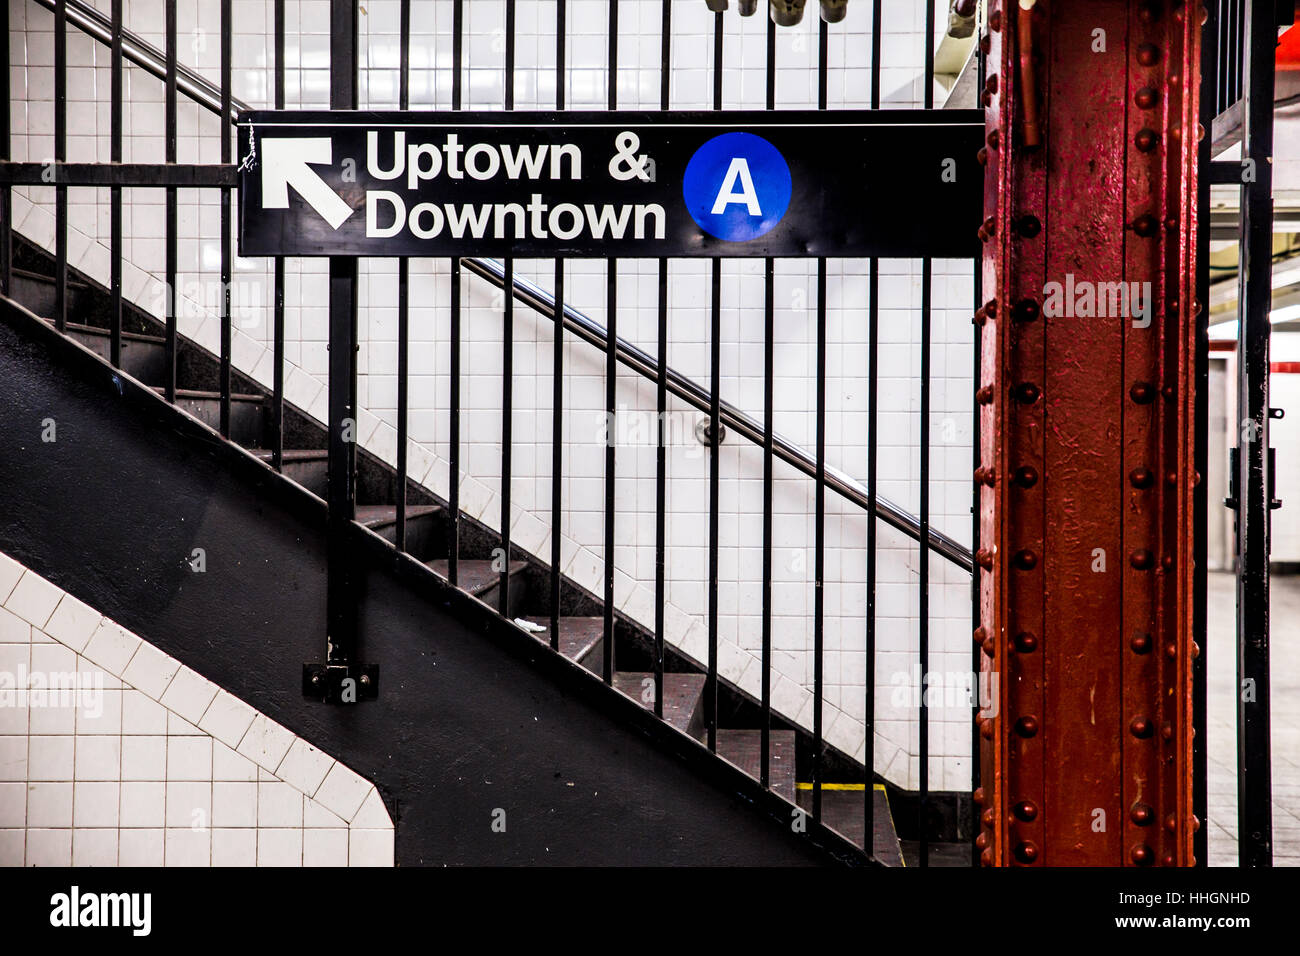 New York City Subway inside and underground with steps and directional sign for Uptown Downtown A train. Stock Photo